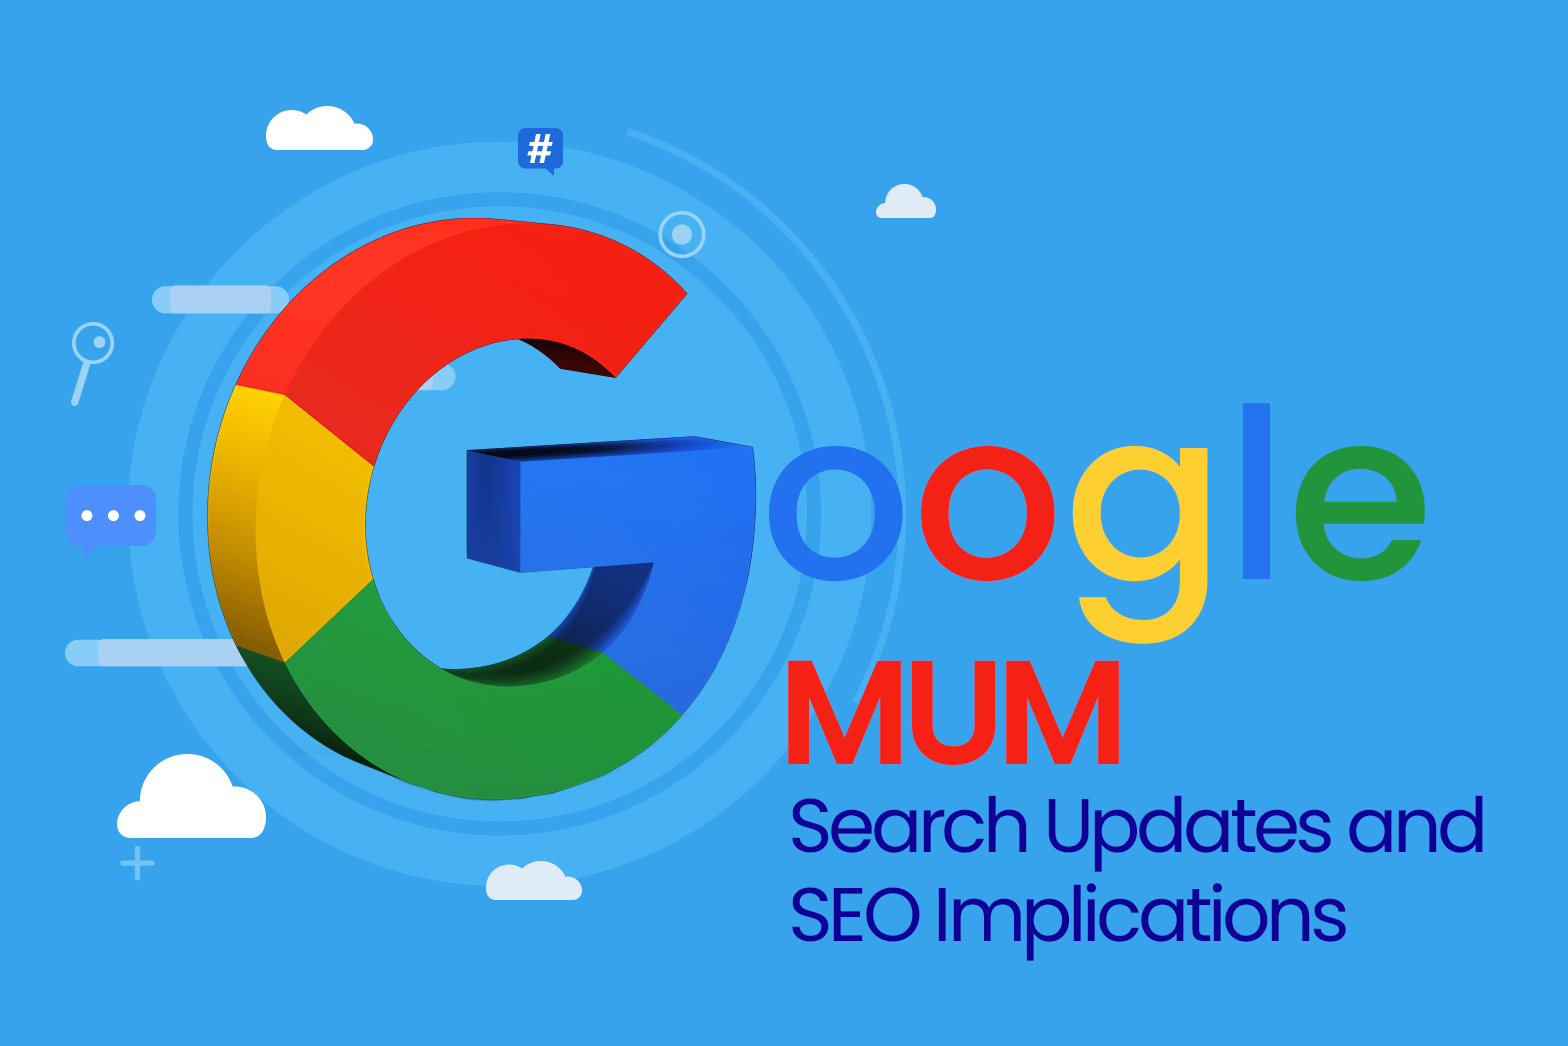 Google’s MUM: Search Updates and SEO Implications